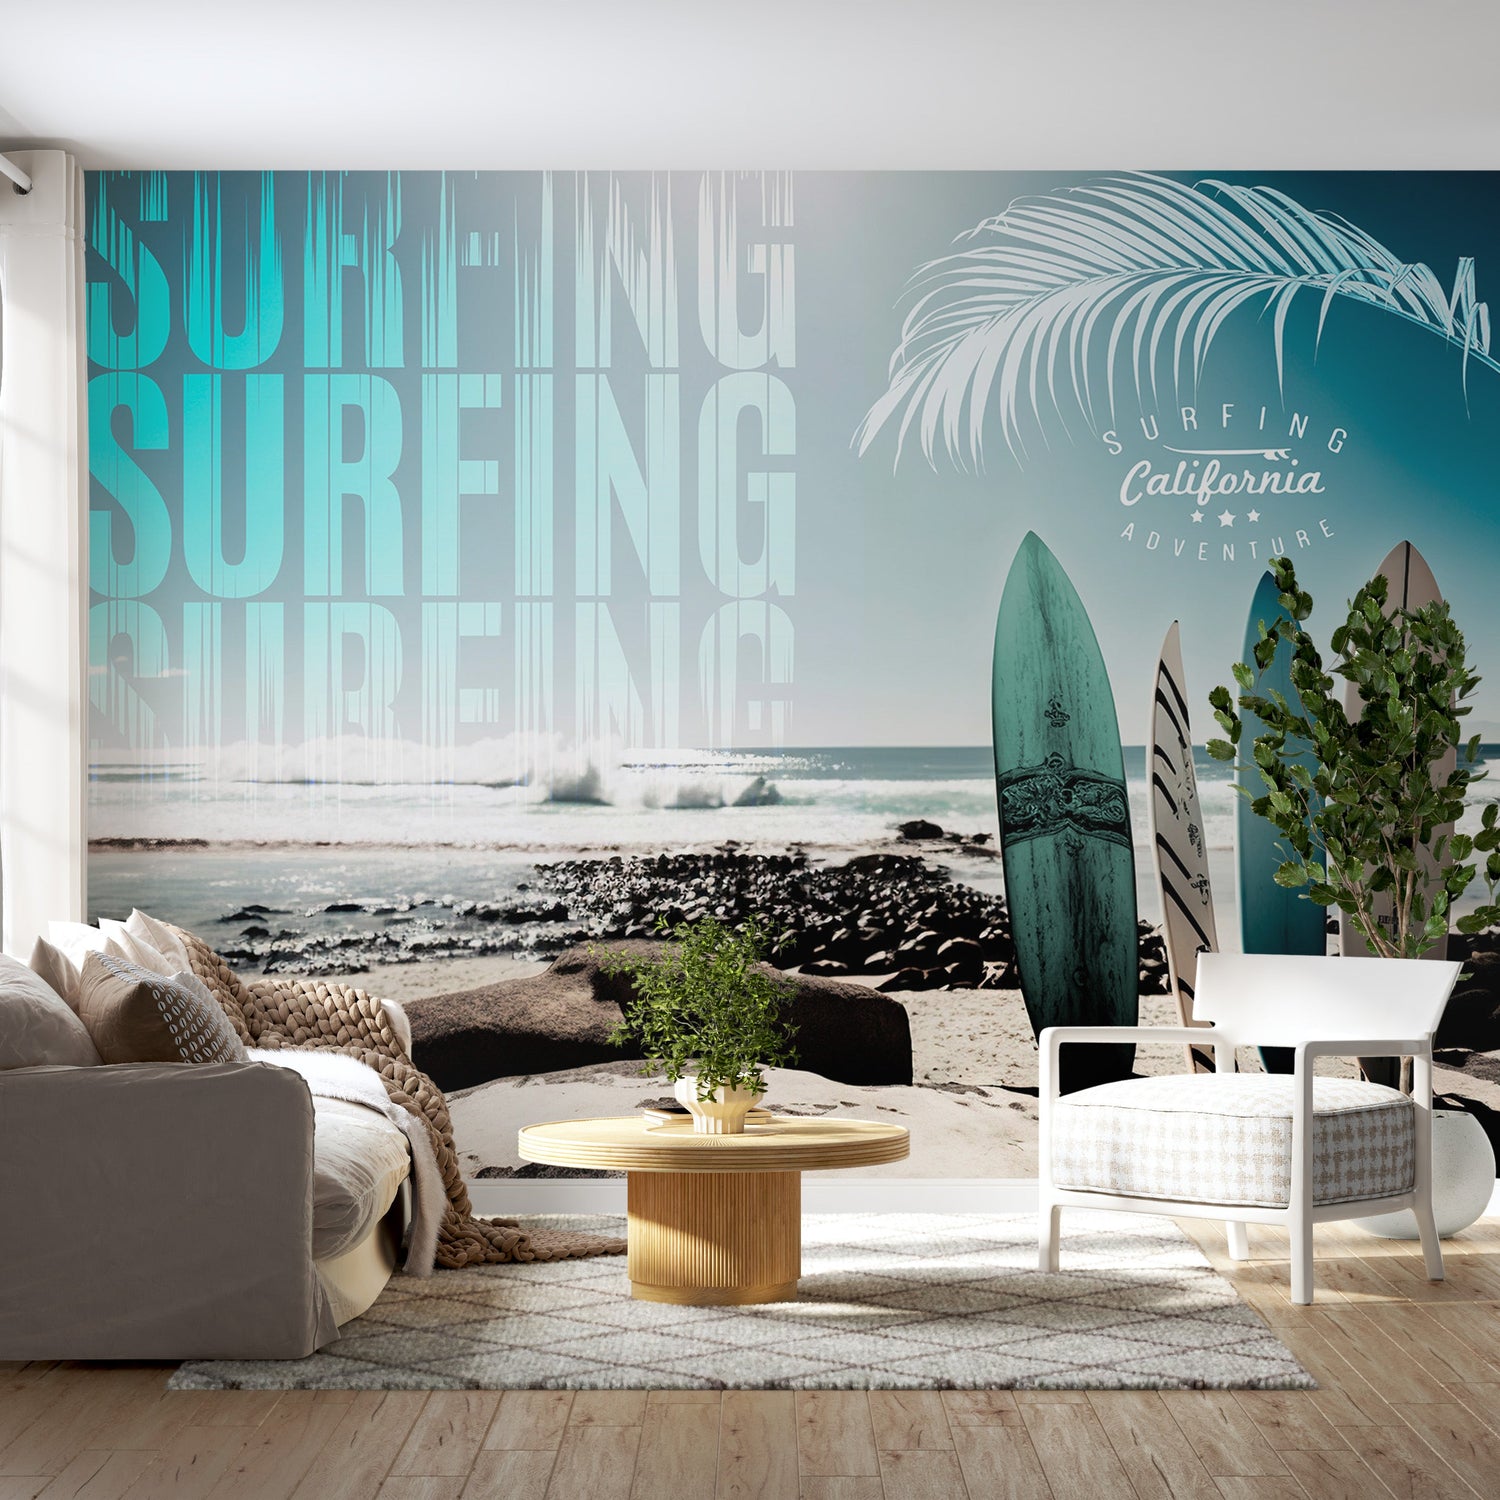 Peel & Stick Surf Wall Mural - California Surfing Adventure - Removable Wall Decals-Tiptophomedecor